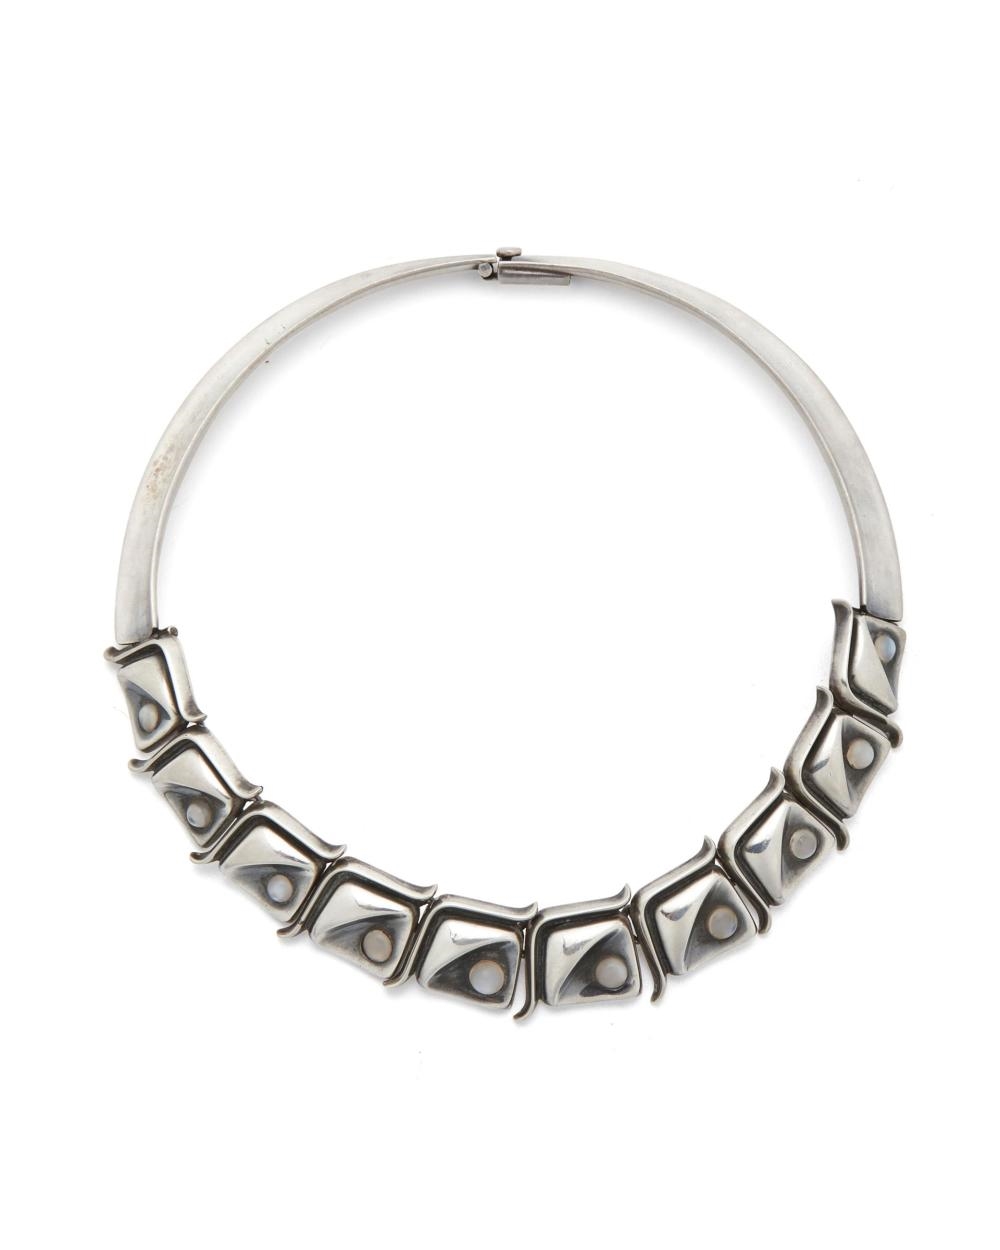 An sterling silver and moonstone necklace by Antonio Pineda